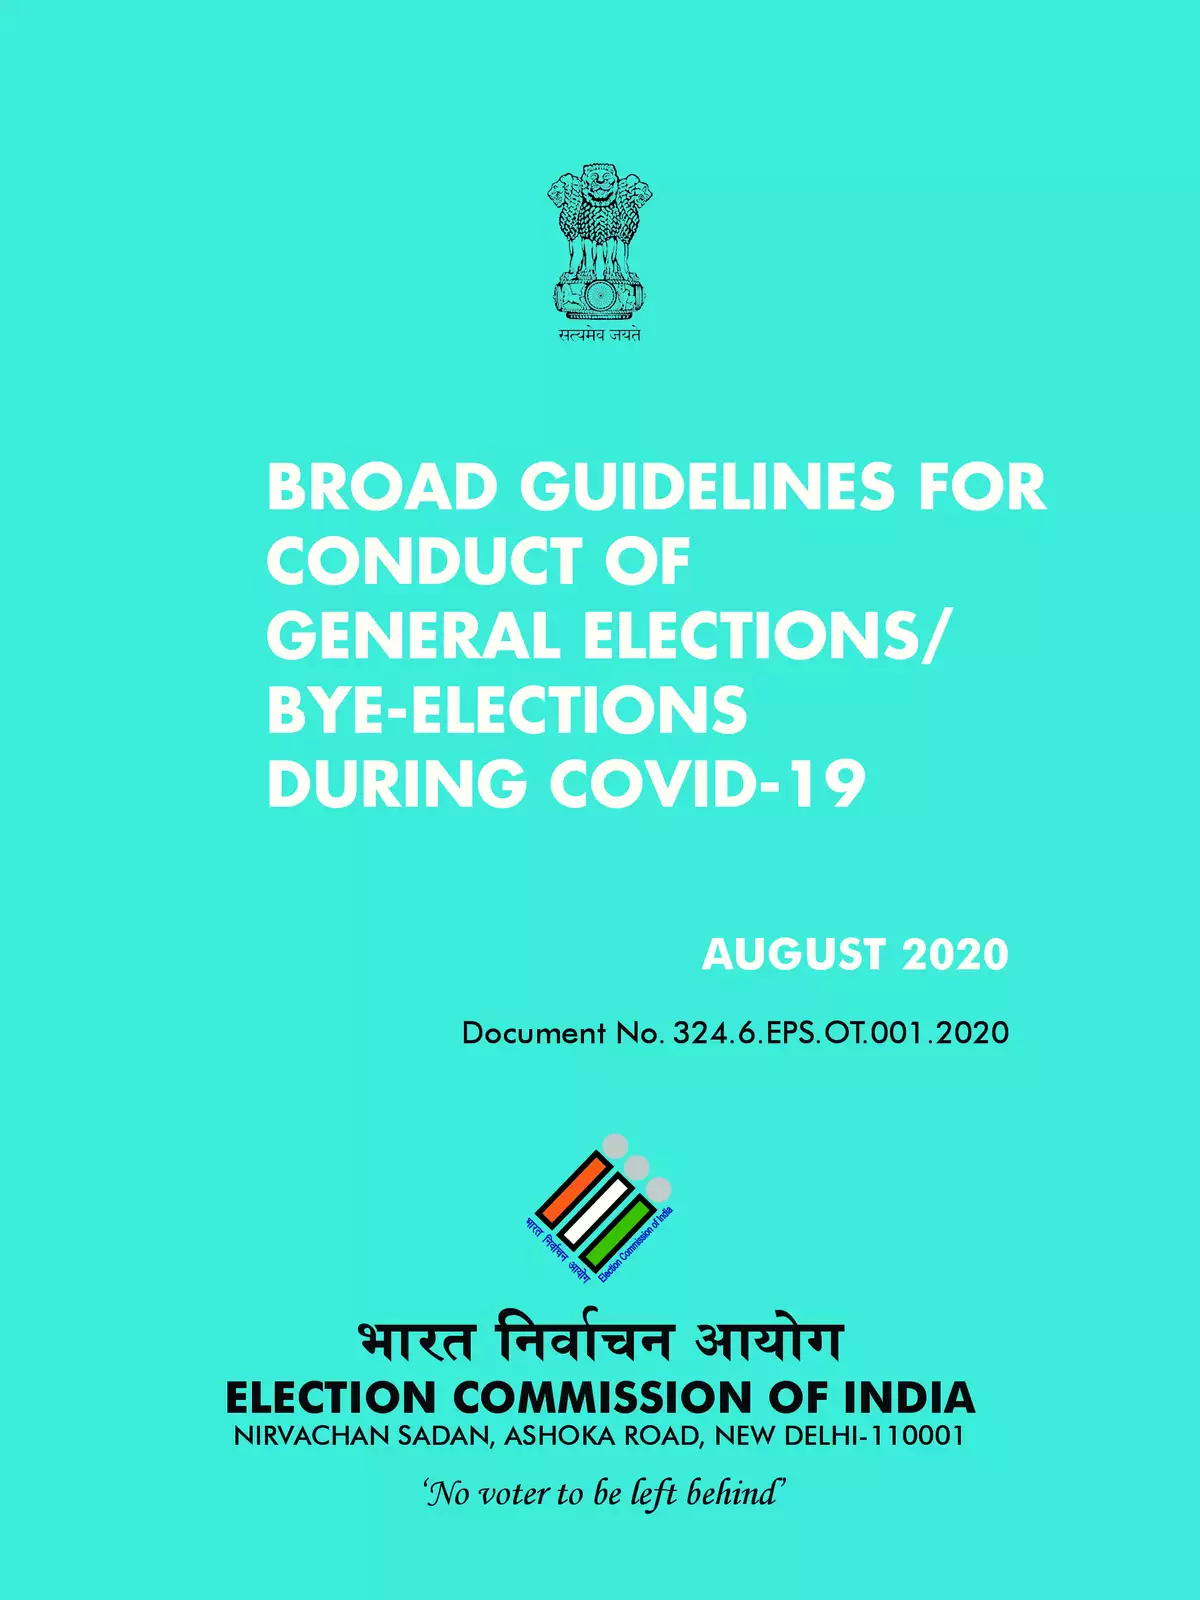 General Election/Bye Election During COVID-19 Guidelines